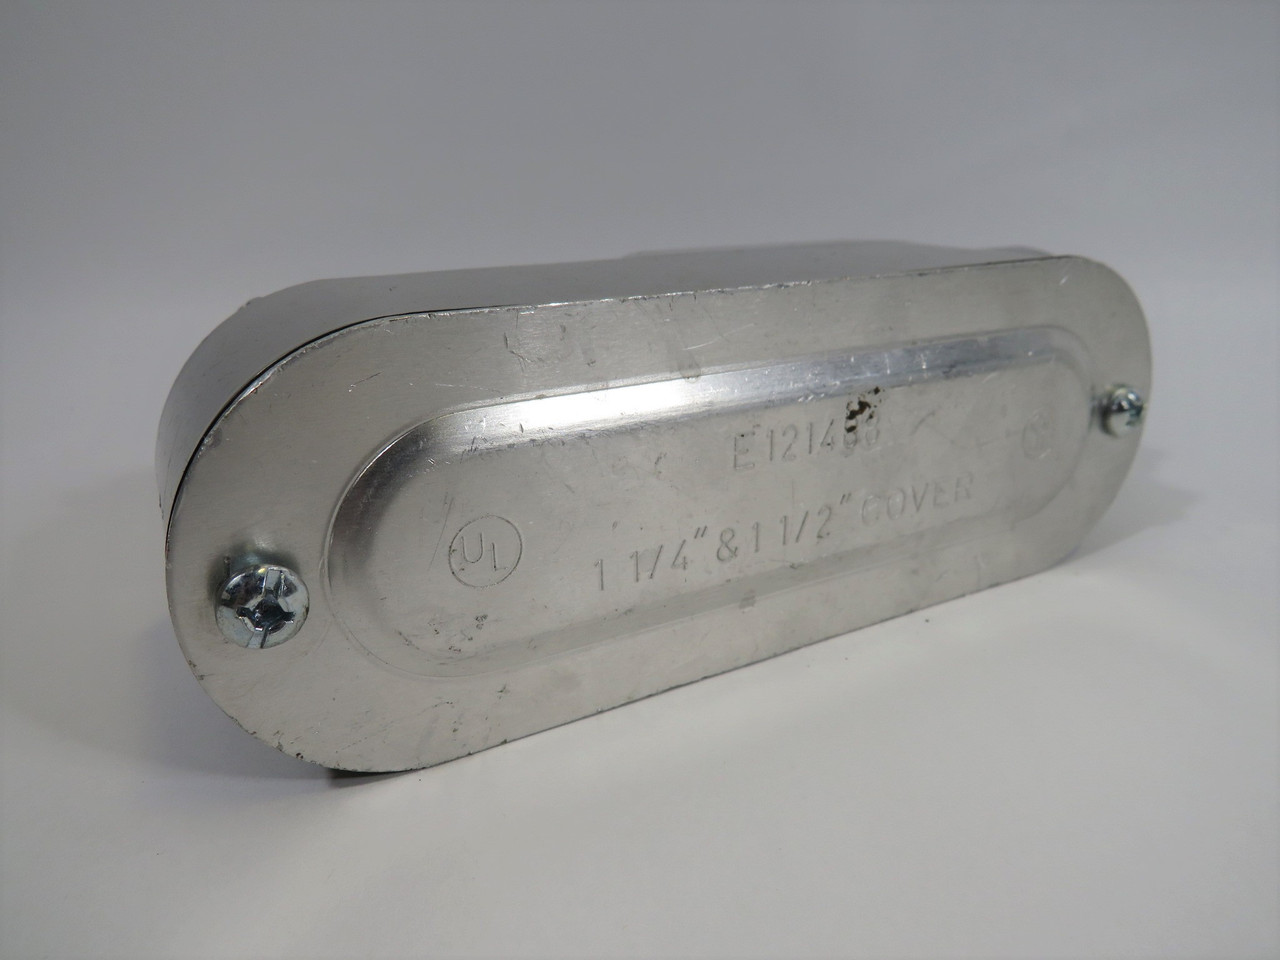 Generic 1-1/4" CLB Conduit Body with Cover USED